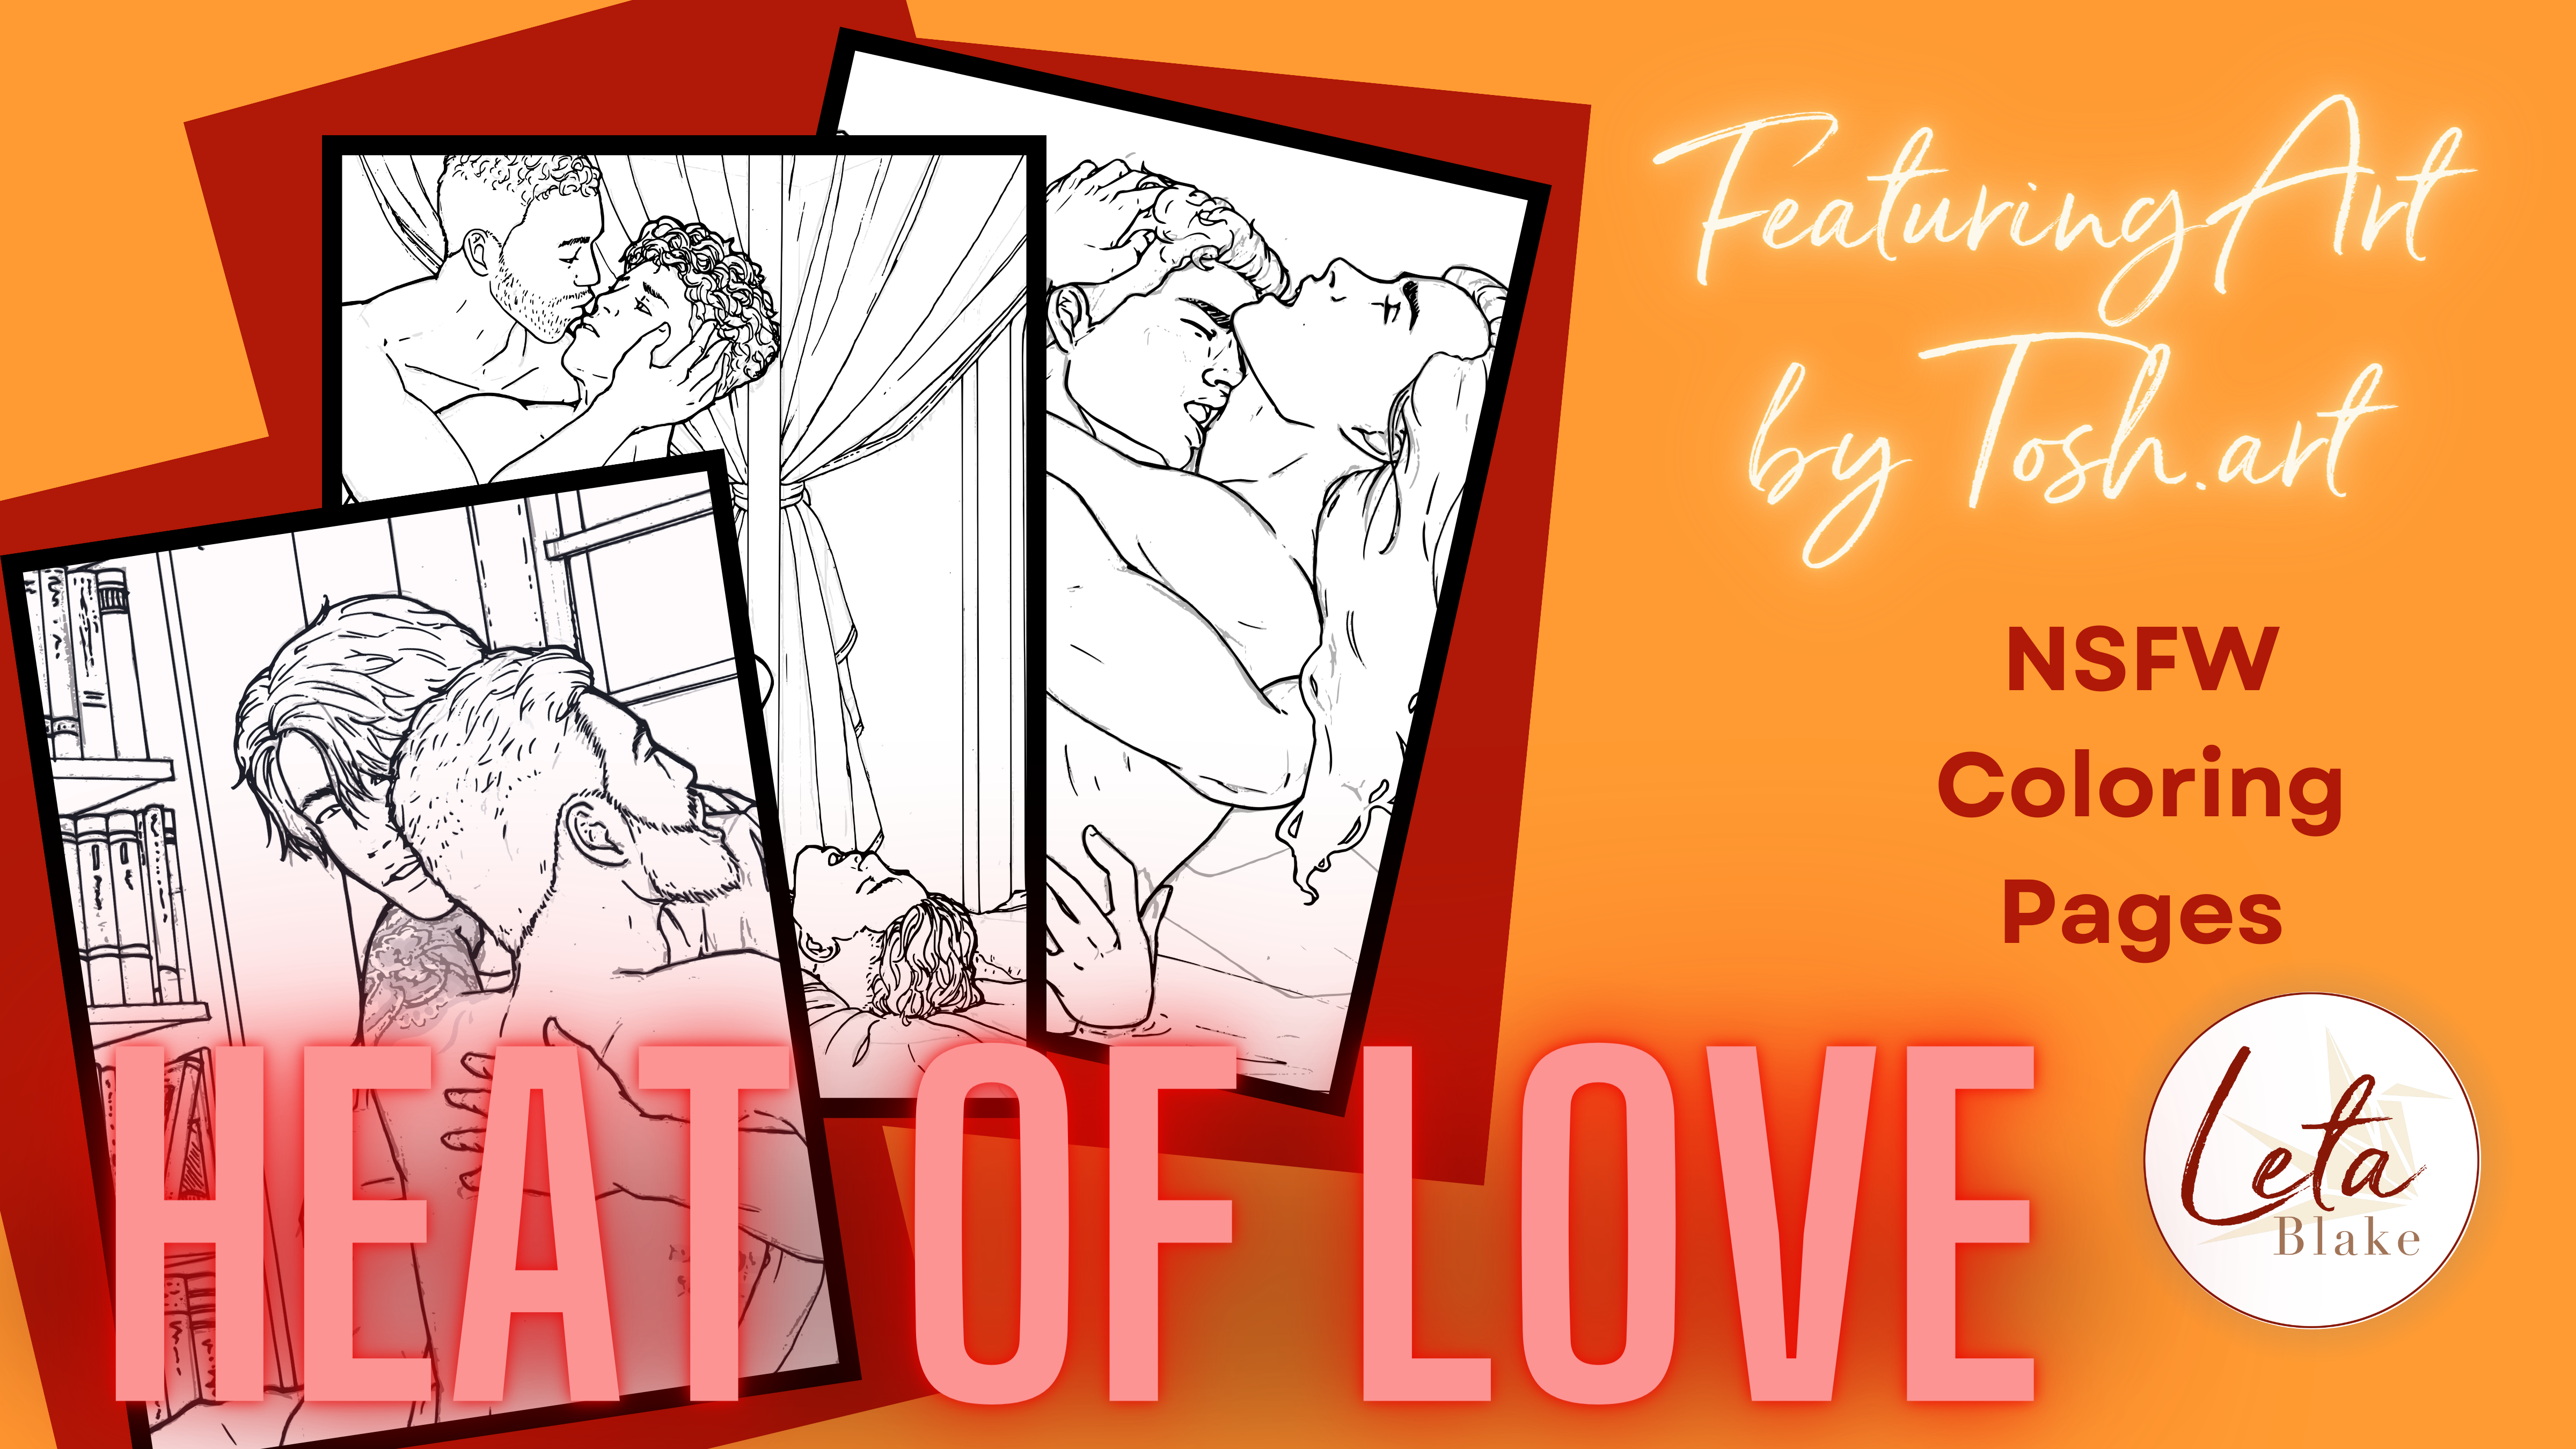 Three line drawing coloring pages on an orange background. The coloring pages feature males in romantic embraces, but they are arranged so that NSFW details cannot be seen. Text reads "Featuring Art by Tosh.art", "NSFW Coloring Pages", and "Heat of Love".